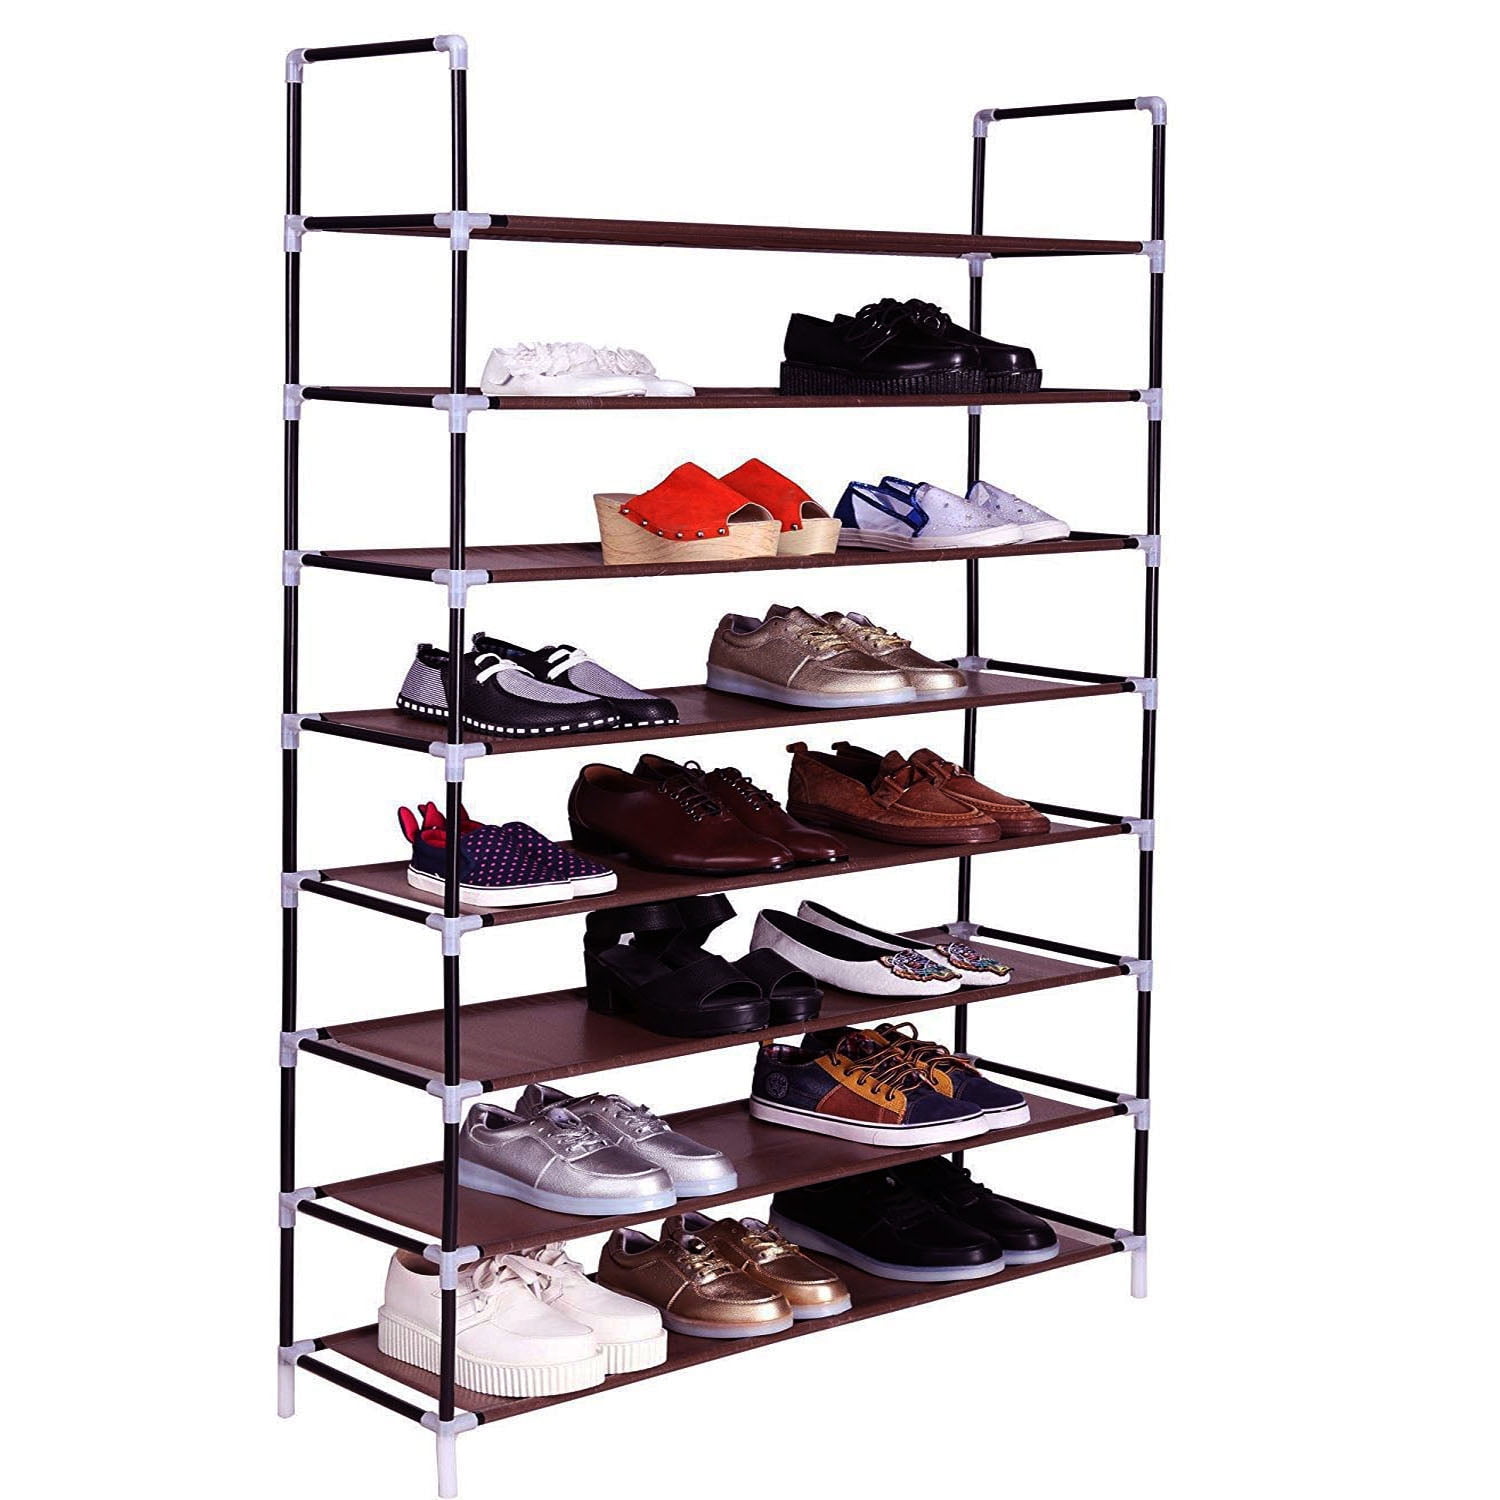 timebal 8-tier shoe rack, stackable shoe storage organizer, holds 52-60  pair shoes and boots, durable metal pipes and plastic